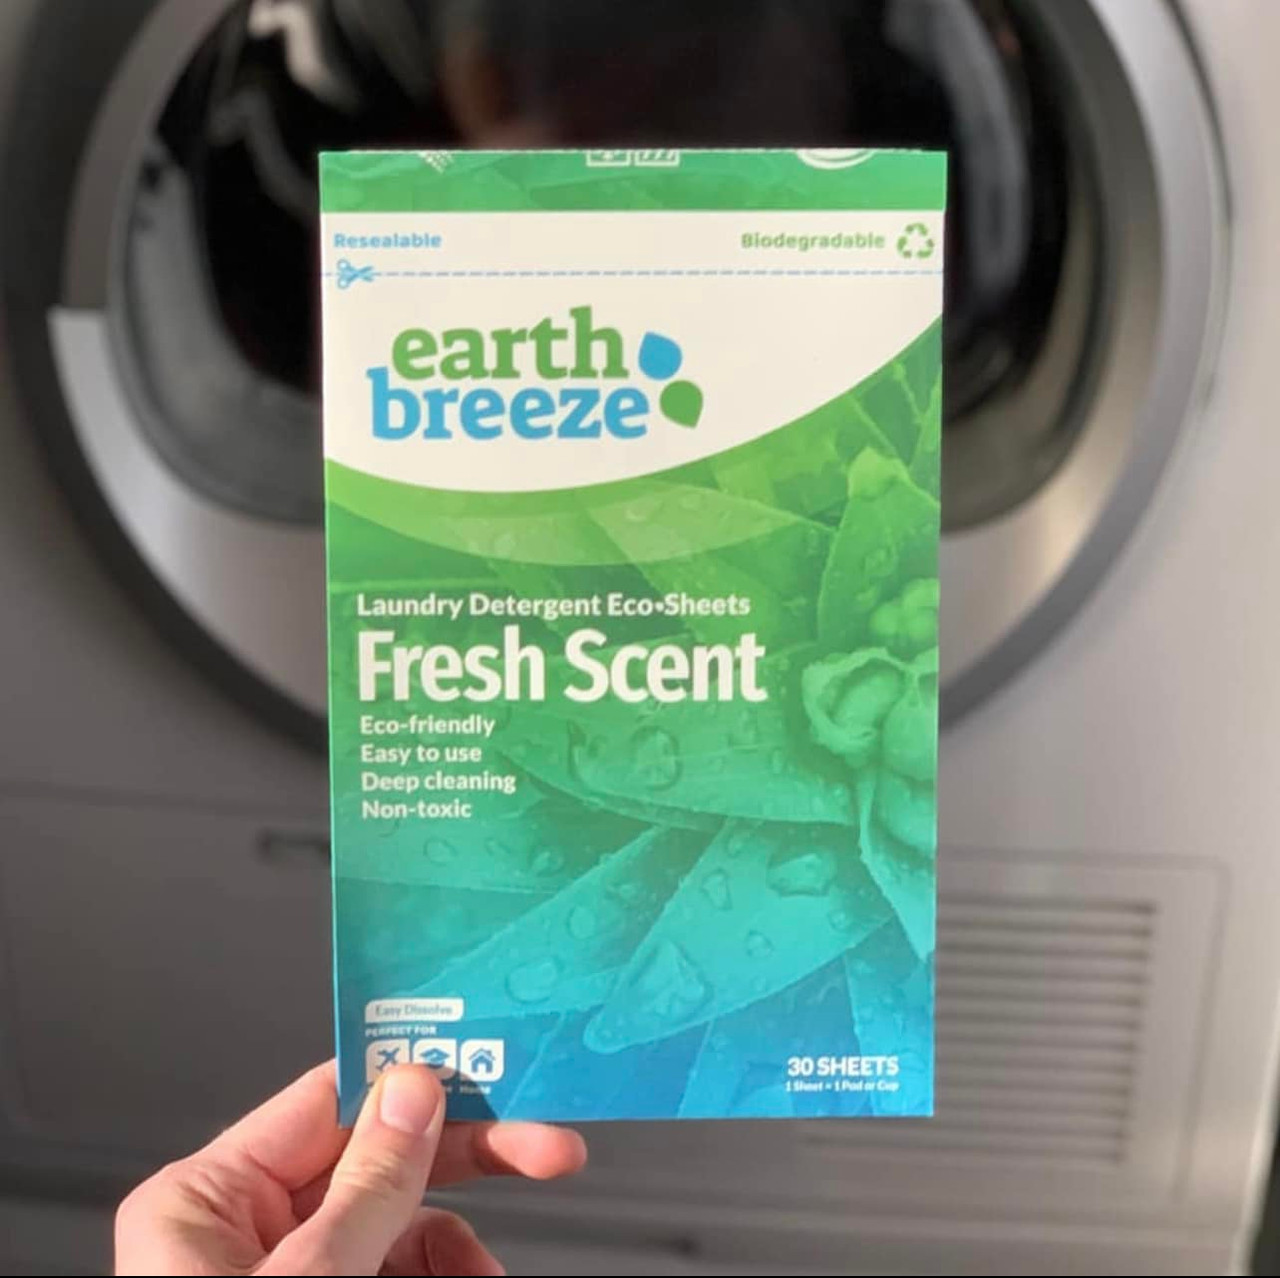 Earth Breeze Eco Detergent Review Laundry Friendly or Not?